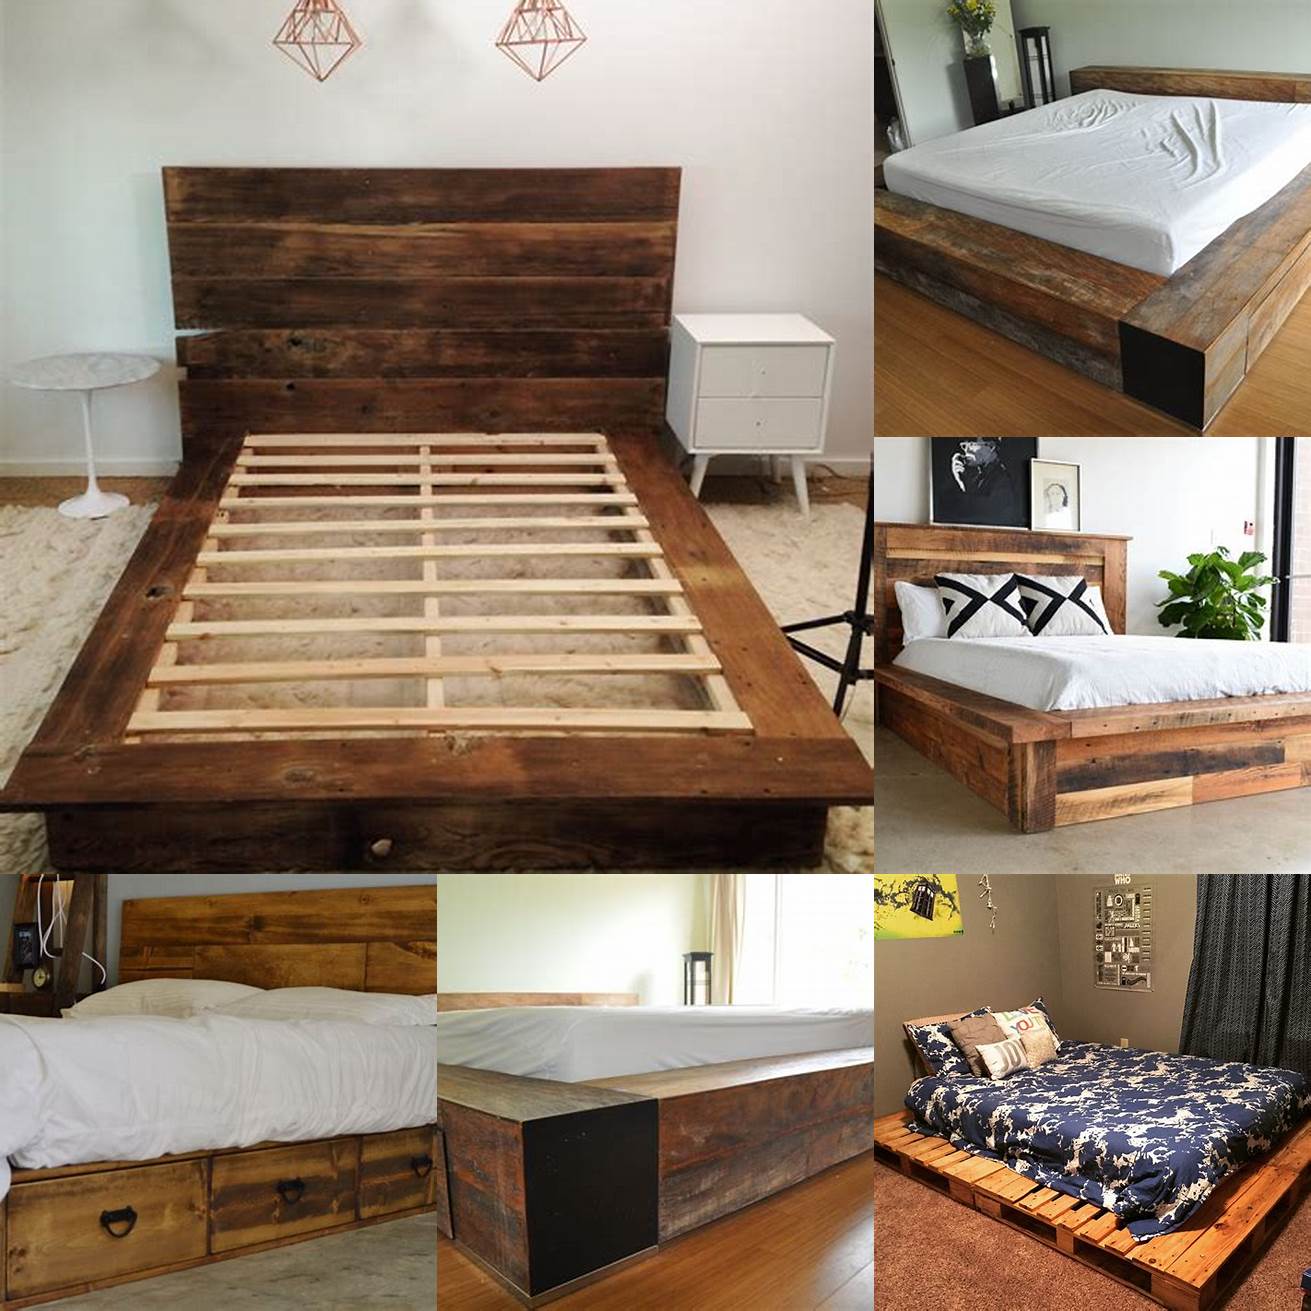 DIY platform bed made from reclaimed wood